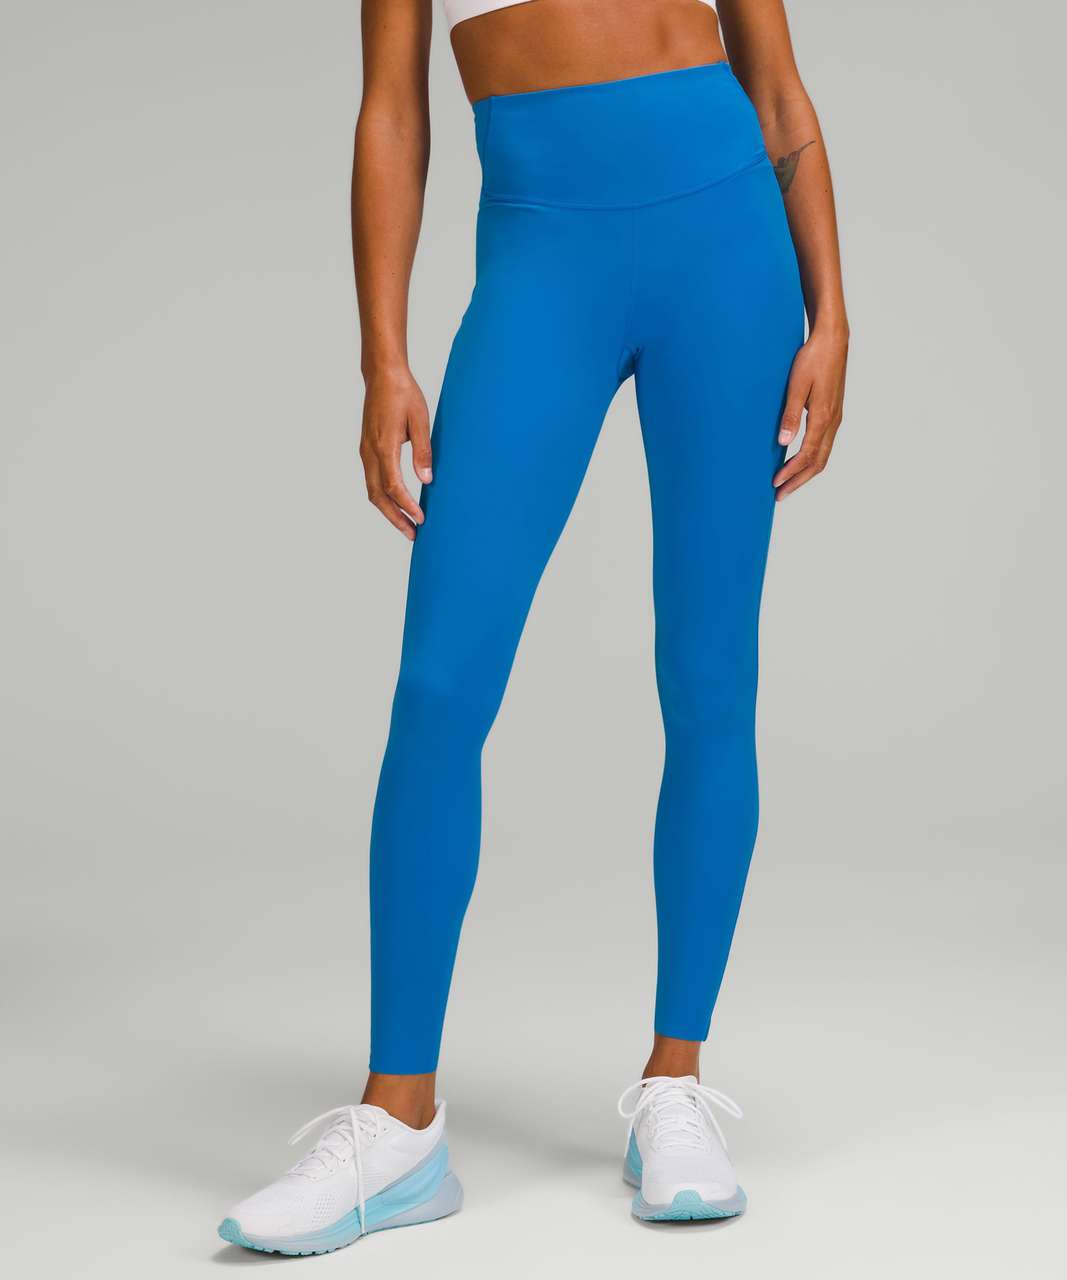 Lululemon Base Pace High-Rise Tight 28" - Poolside